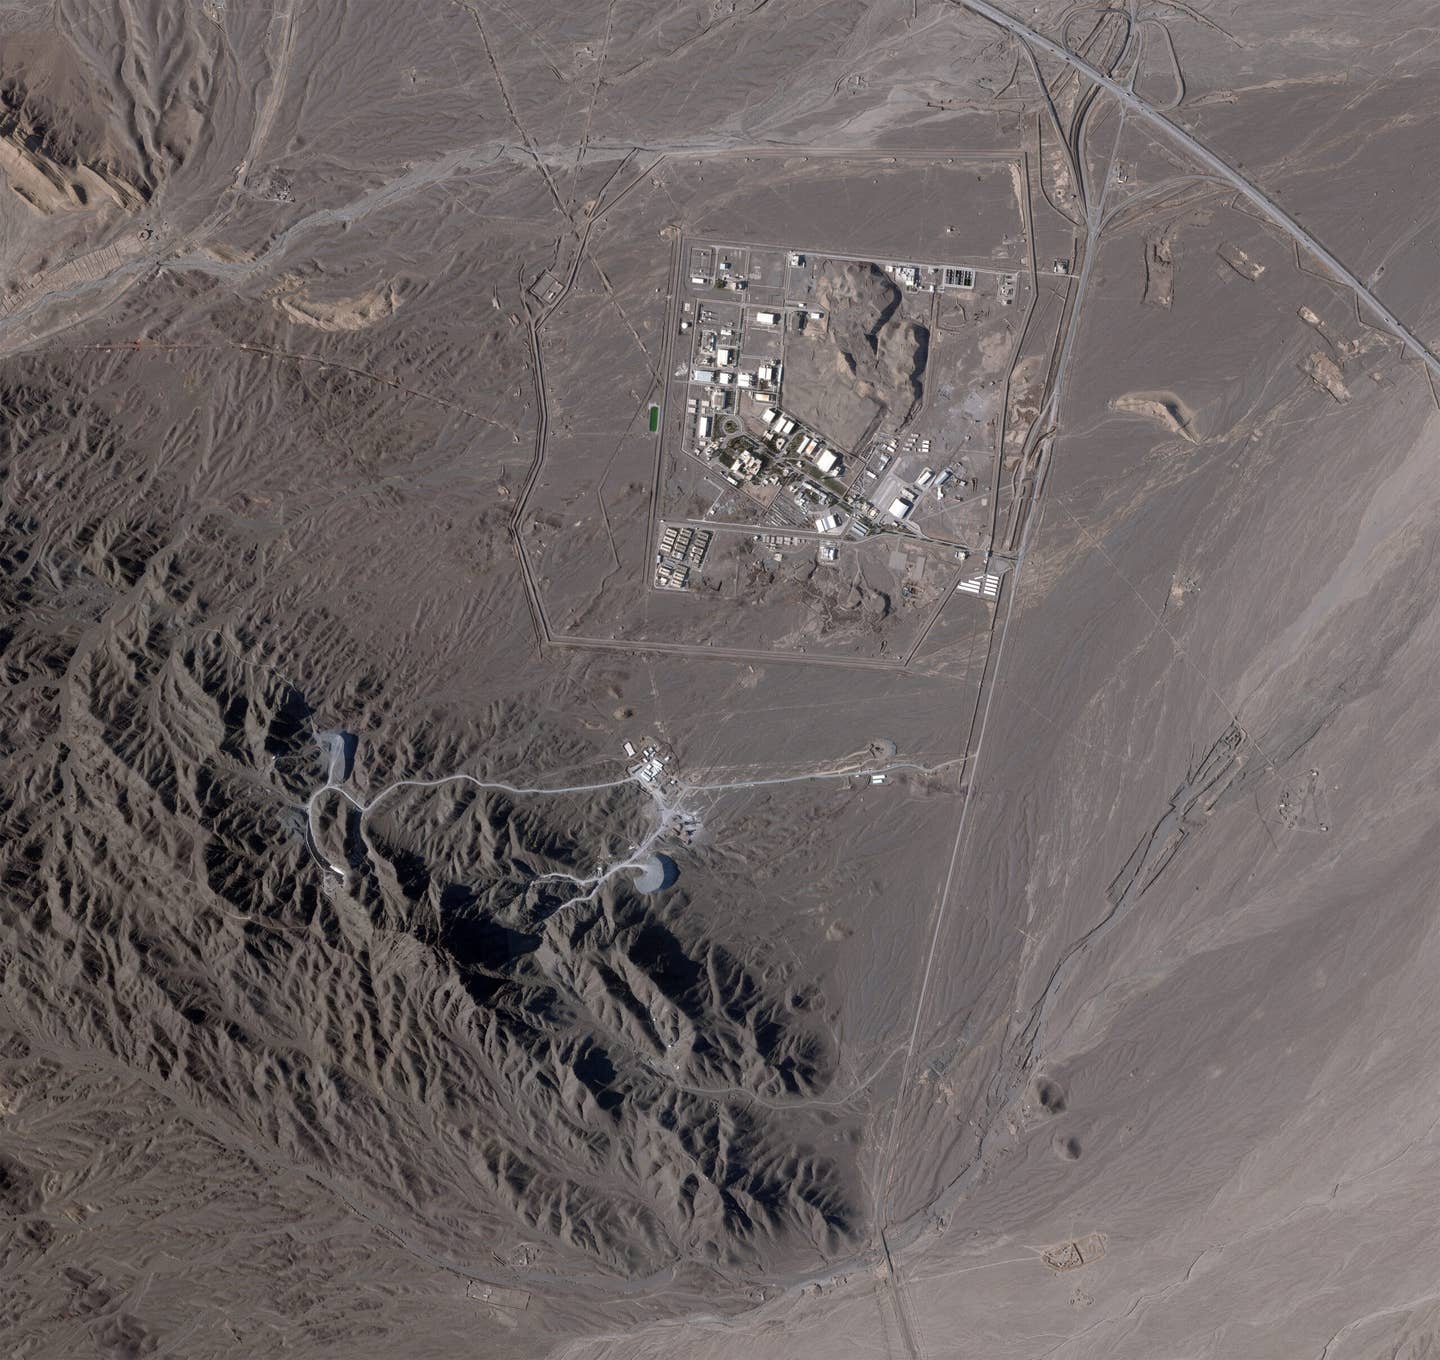 A satellite image taken on April 14, 2023, showing the facilities at Natanz, including the tunnel entrances to the south. Work on the tunnels is visibly underway, but the facility does not look close to being finished. <em>PHOTO © 2023 PLANET LABS INC. ALL RIGHTS RESERVED. REPRINTED BY PERMISSION</em>